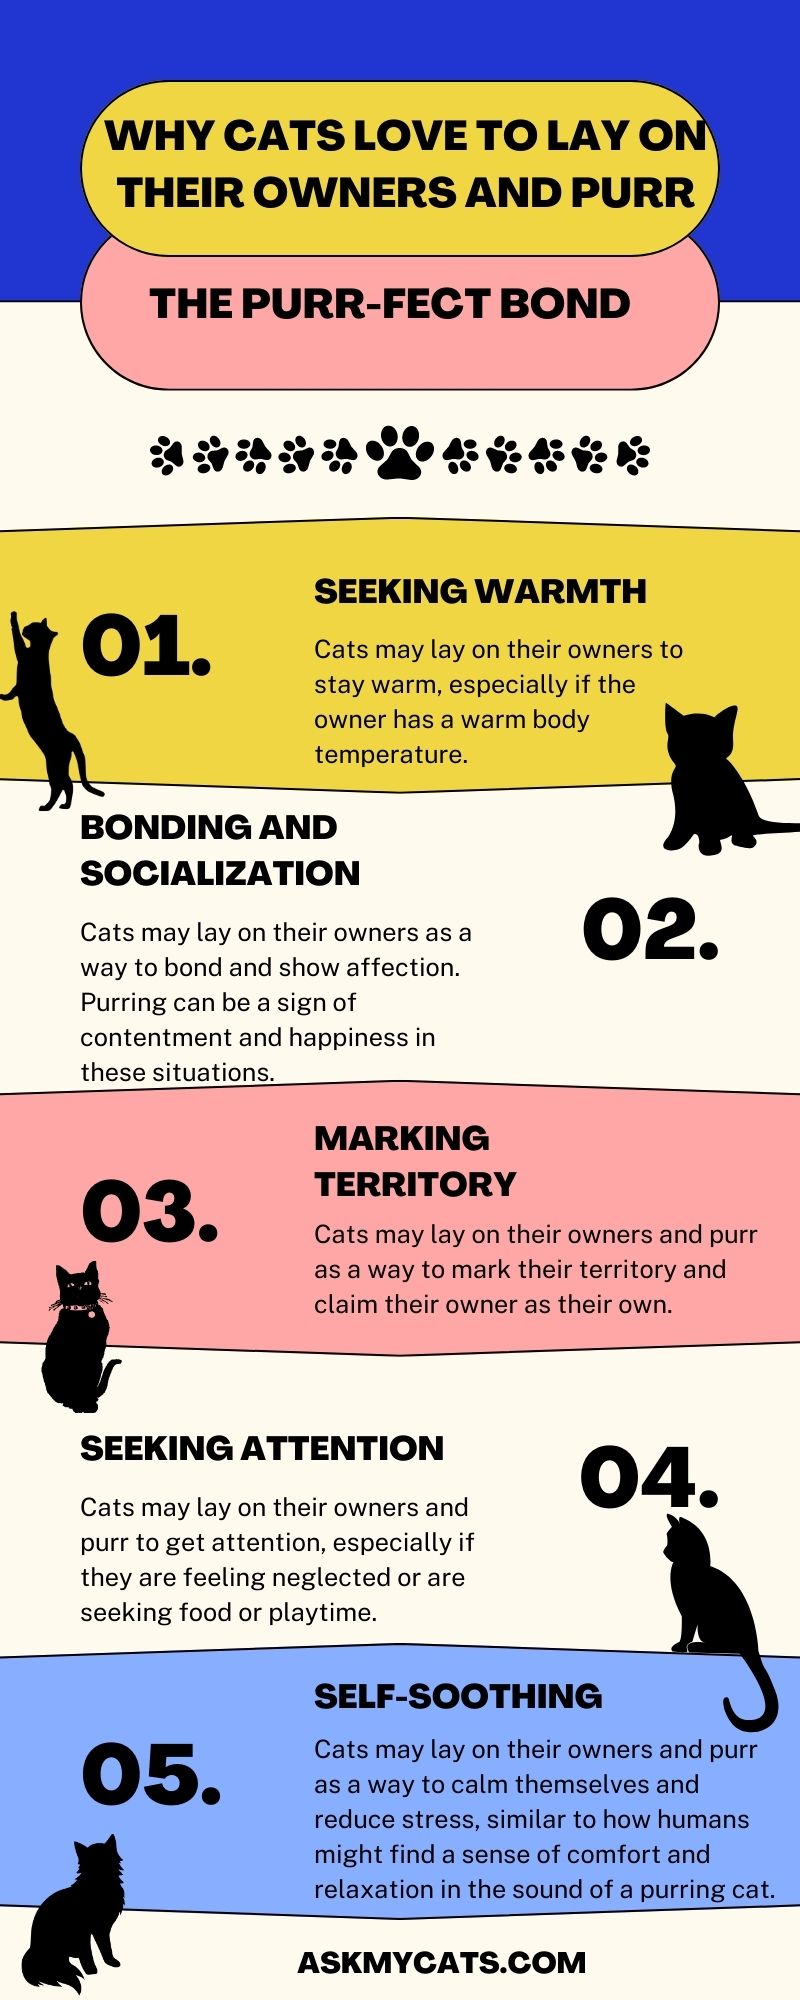 Why Cats Love to Lay on Their Owners and Purr (Infographic)